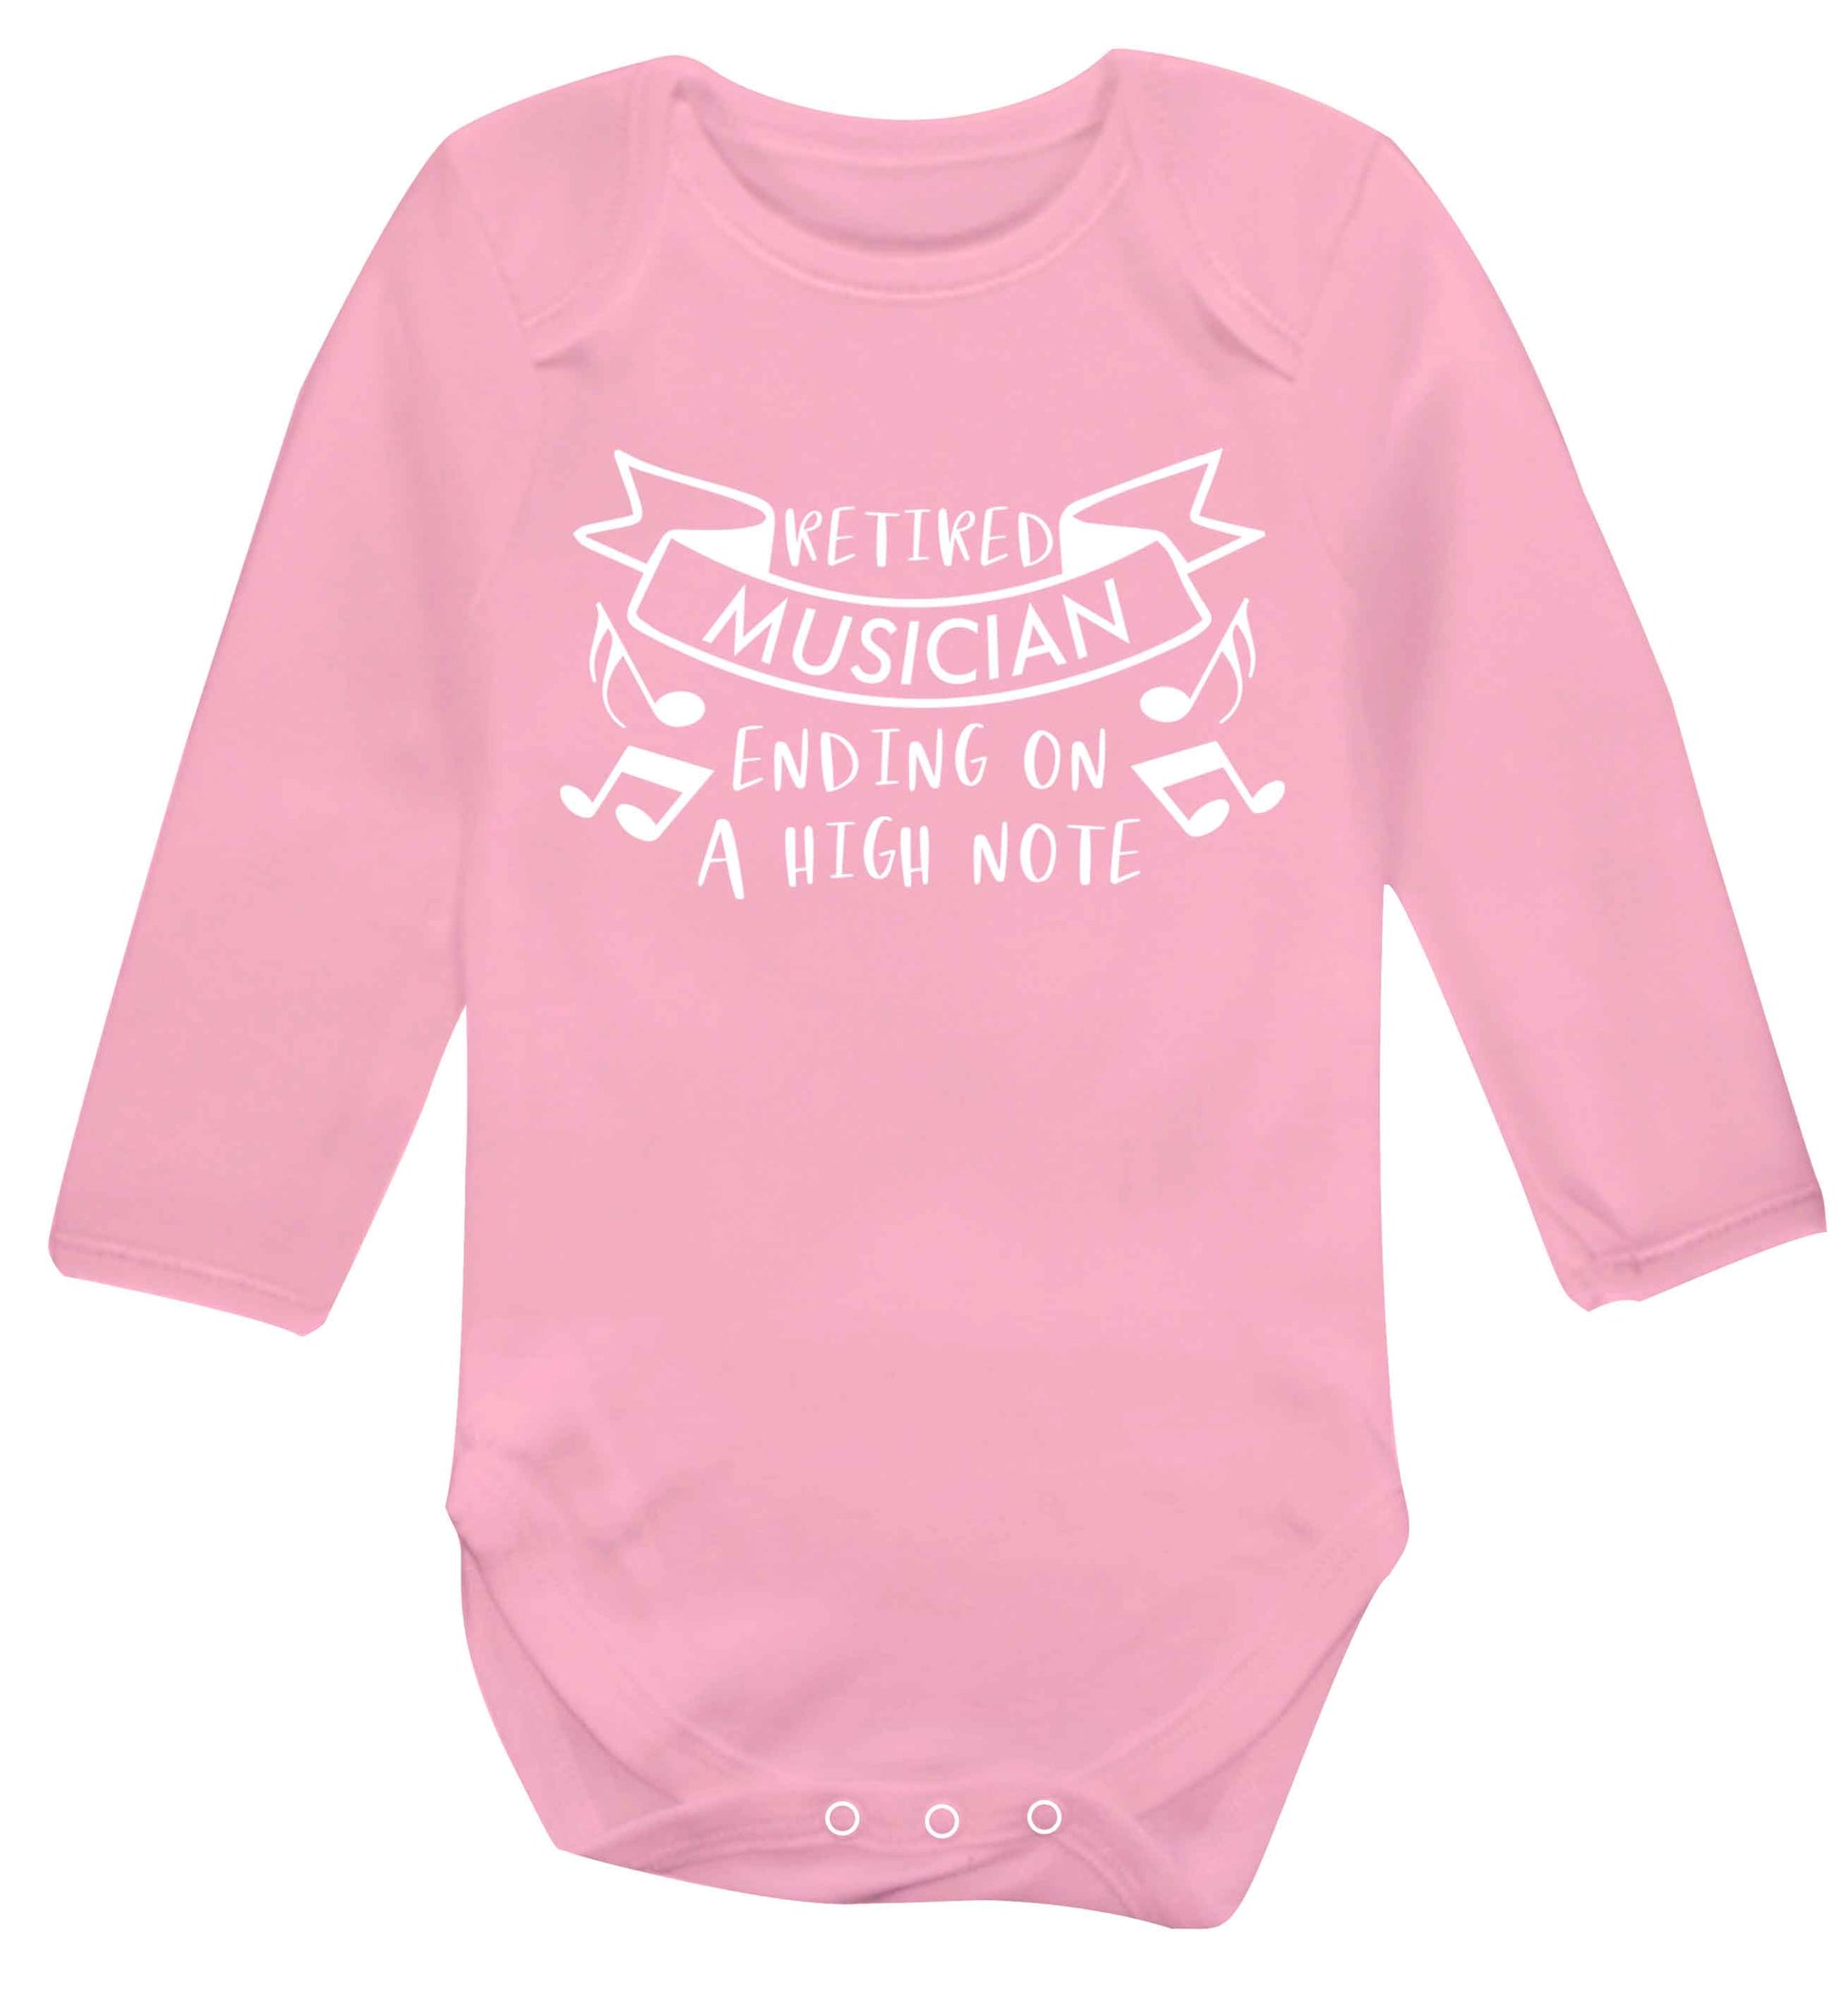 Retired musician ending on a high note Baby Vest long sleeved pale pink 6-12 months